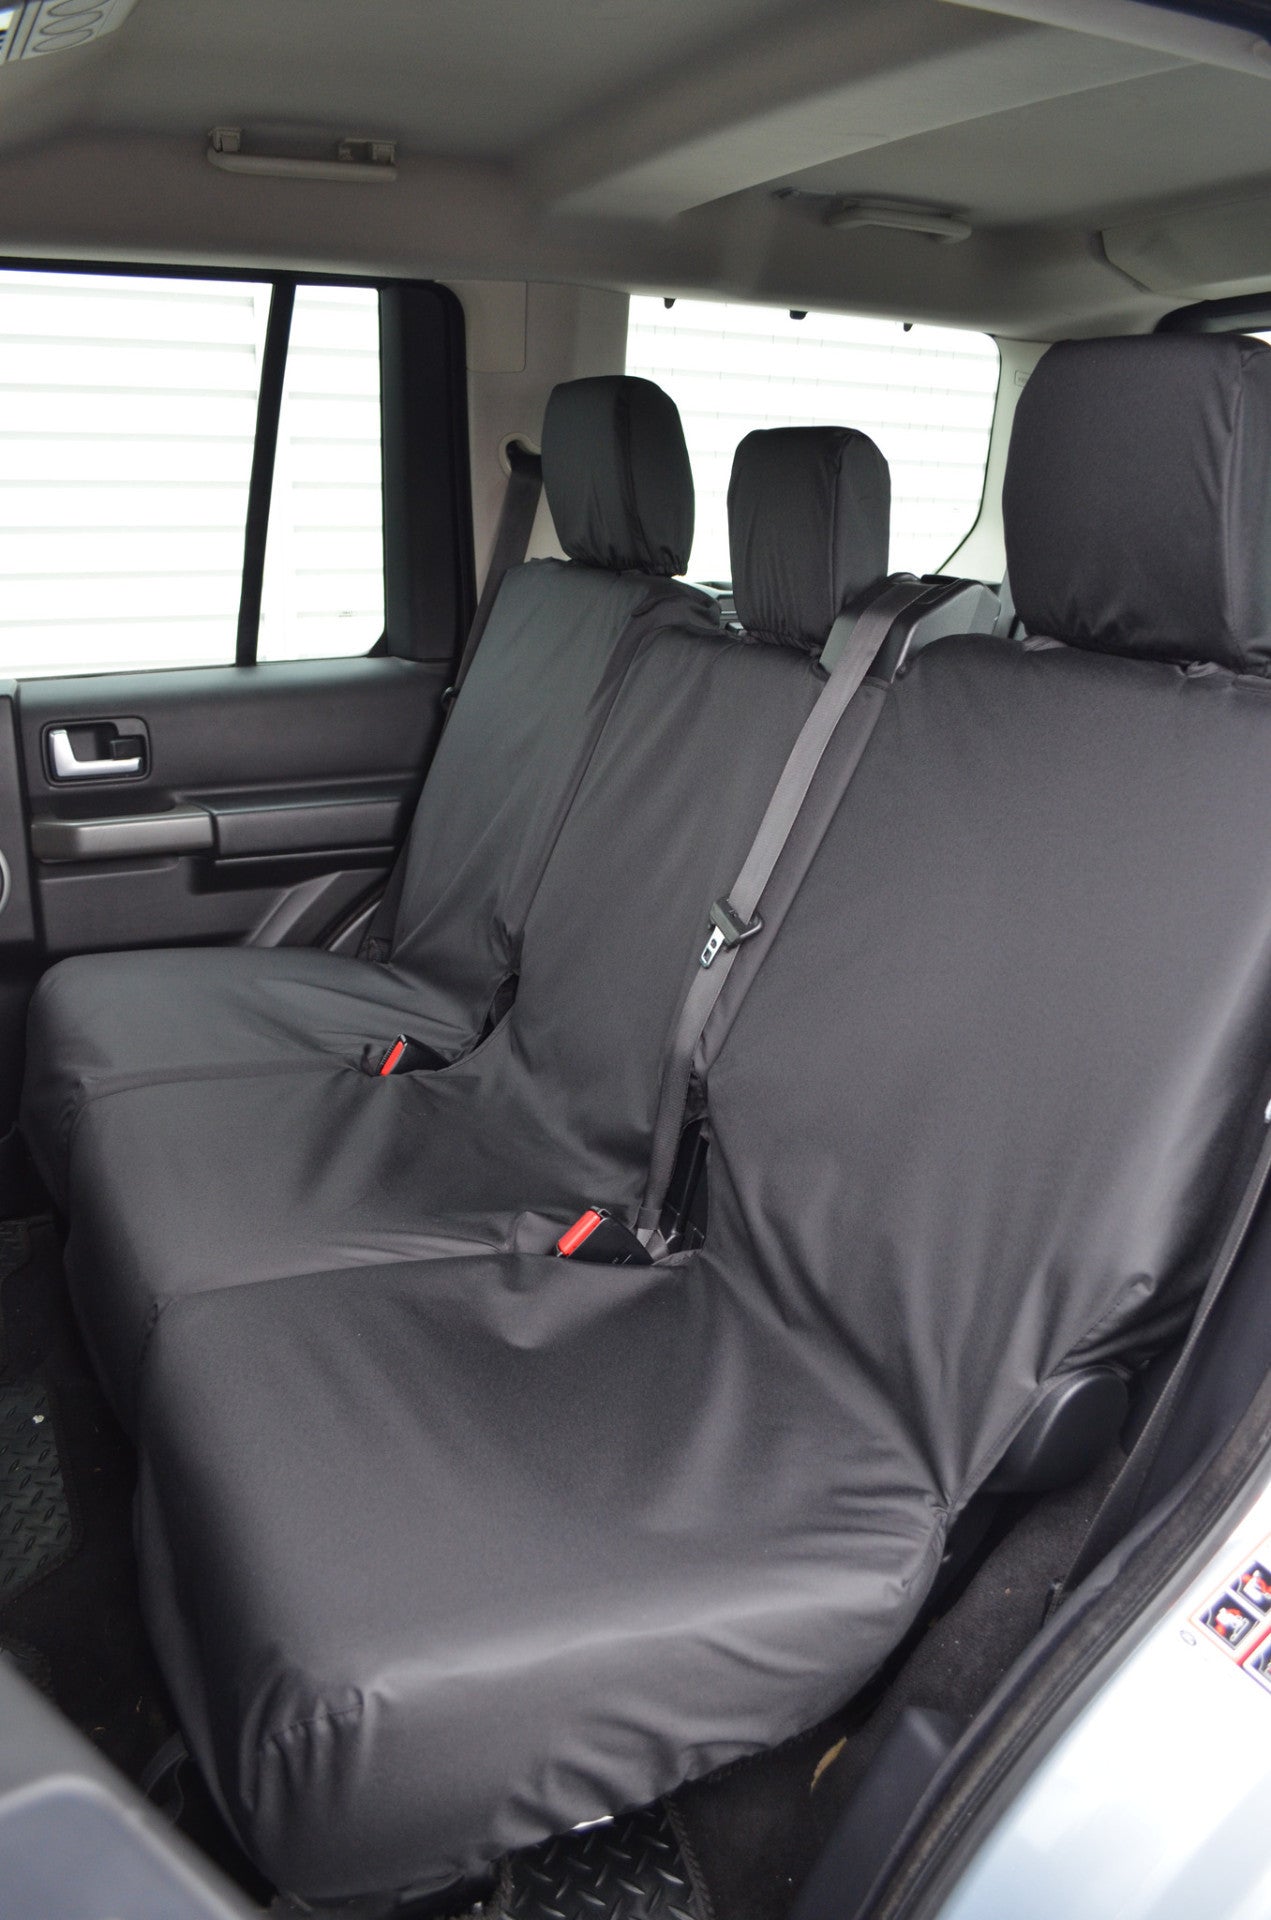 Land Rover Discovery 3 &amp; 4 (2004-2017) Seat Covers Rear 2nd Row (3 Singles) / Black Turtle Covers Ltd